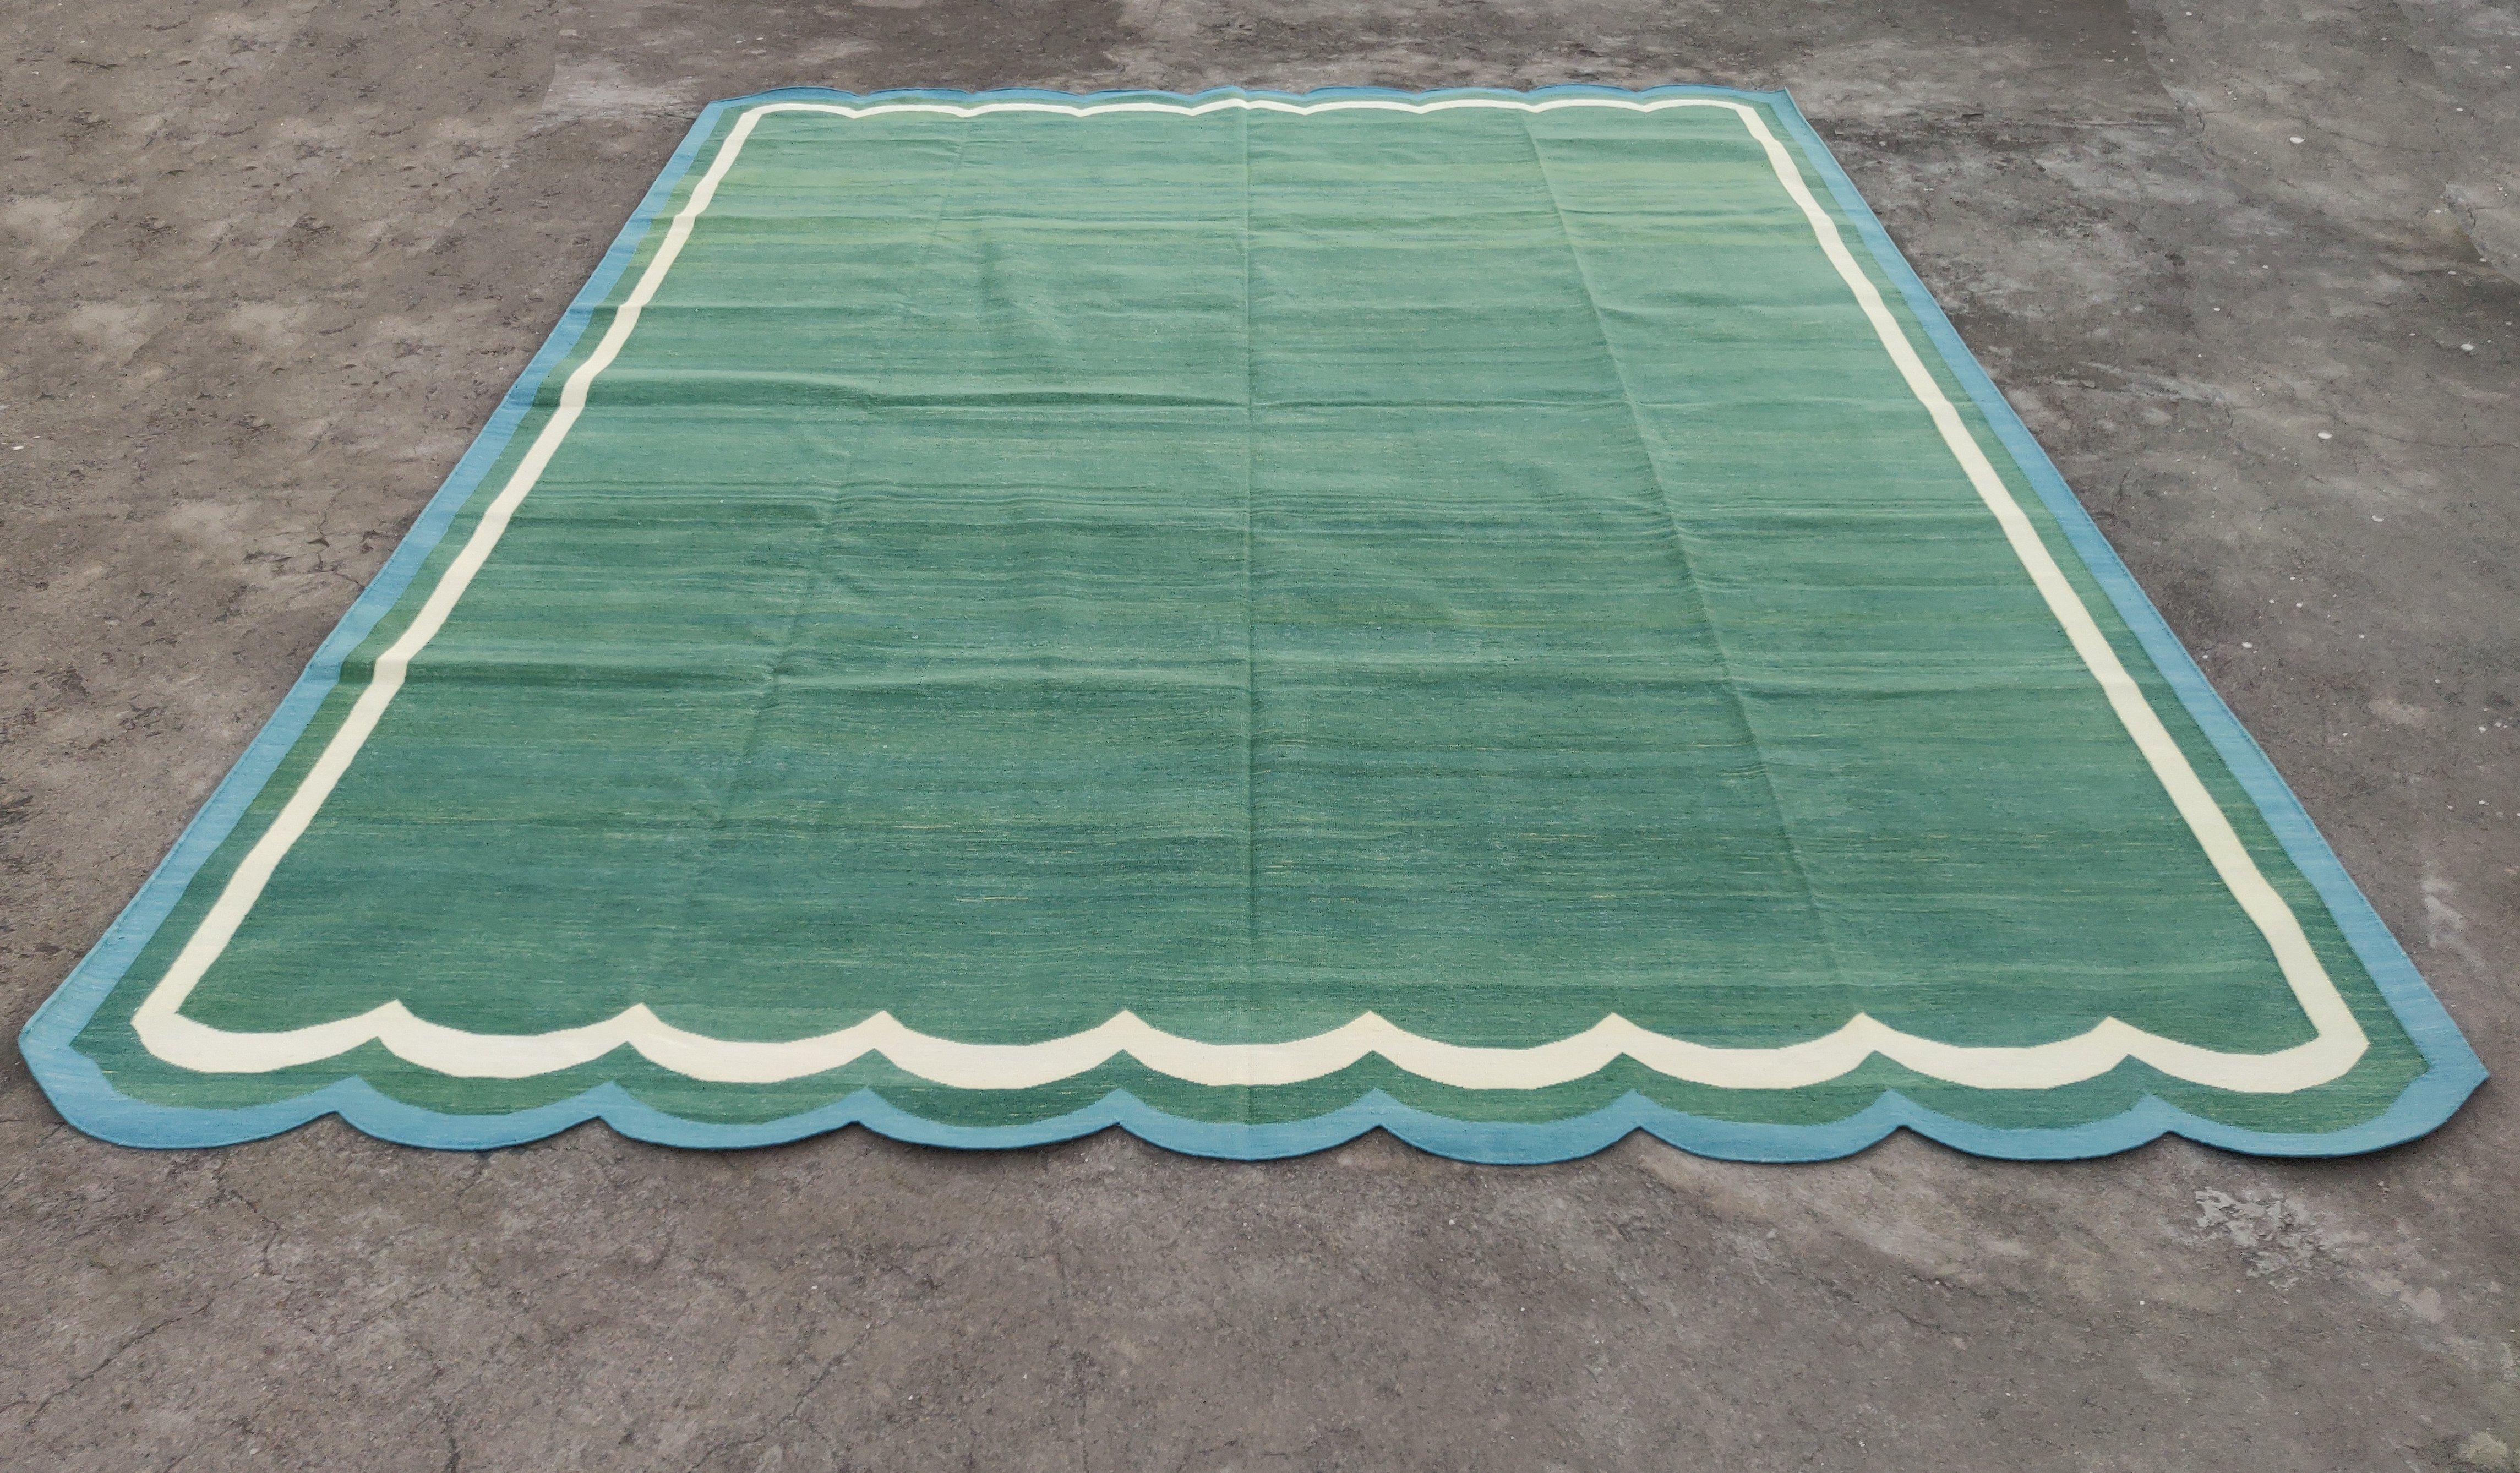 Hand-Woven Handmade Cotton Area Flat Weave Rug, 9x12 Green And Blue Scalloped Kilim Dhurrie For Sale